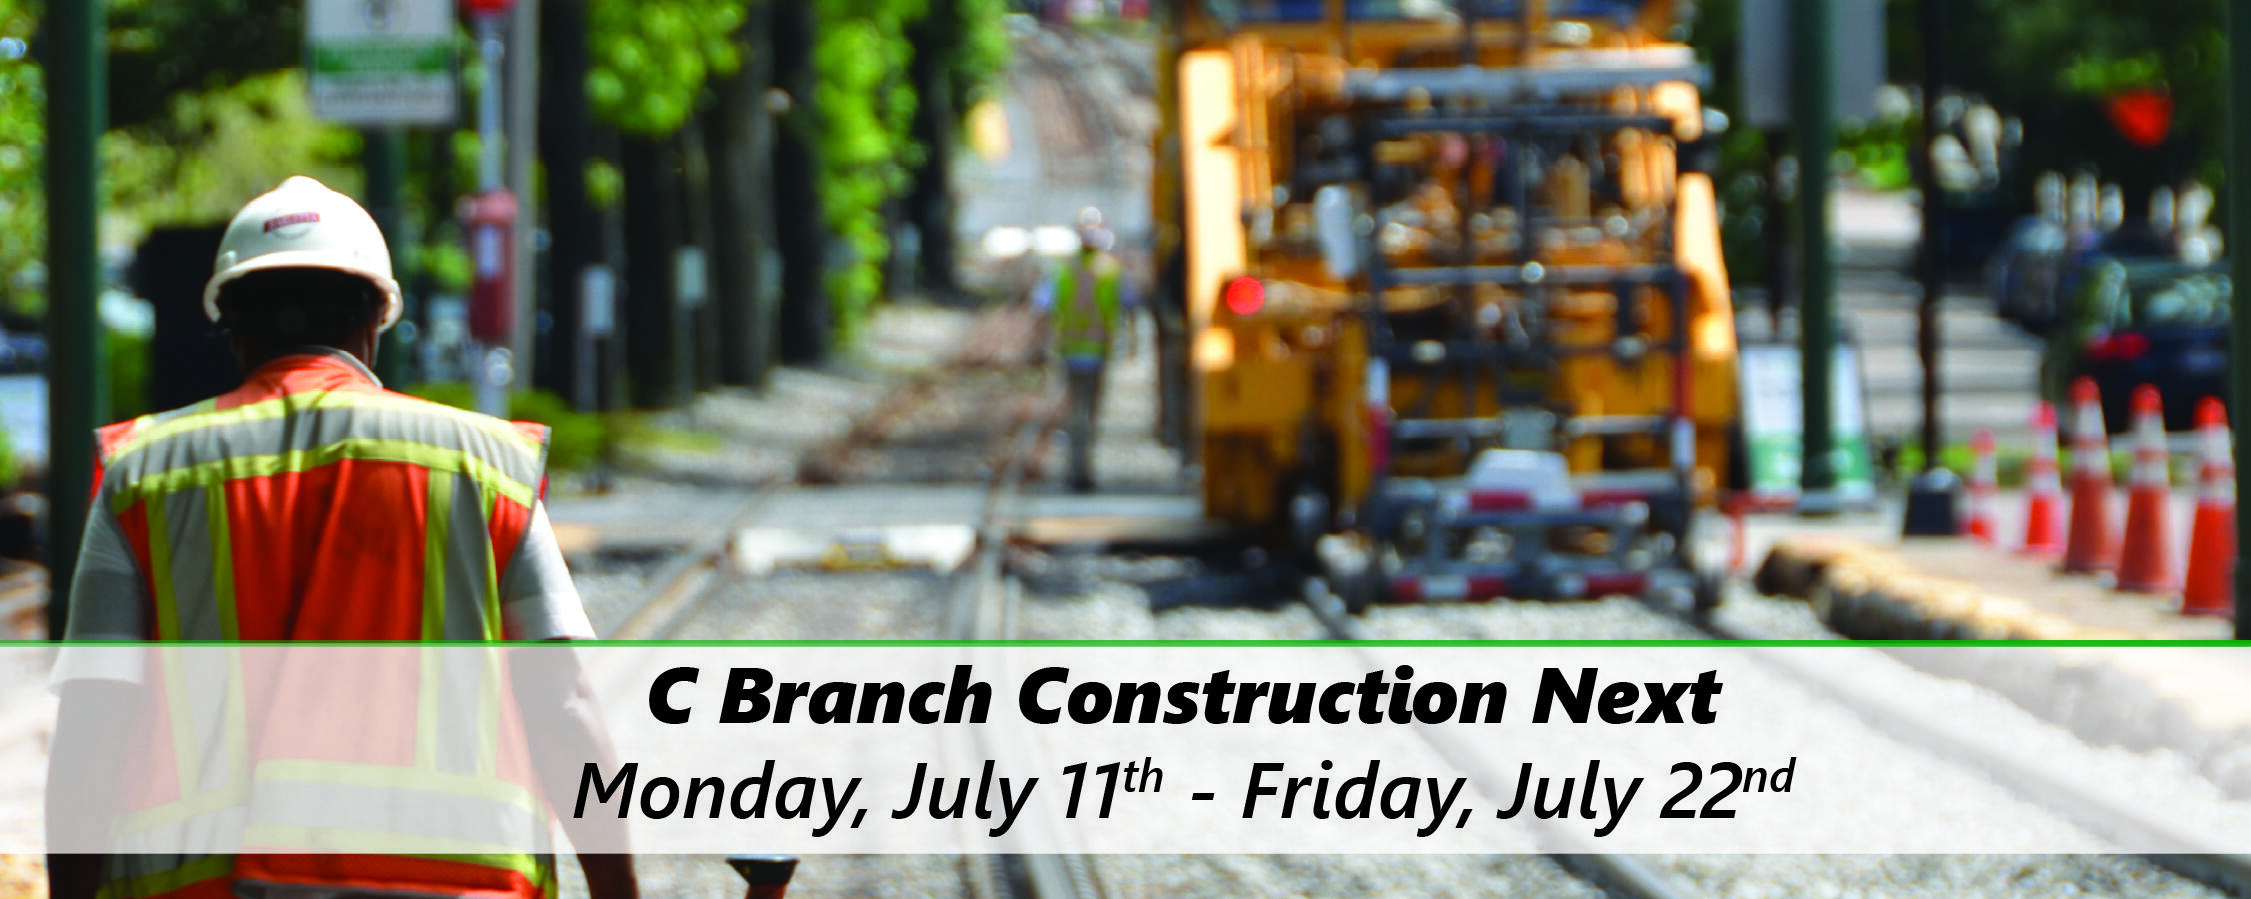 Green Line C Branch service will be replaced with shuttle buses from July 11 to July 22, 2022.